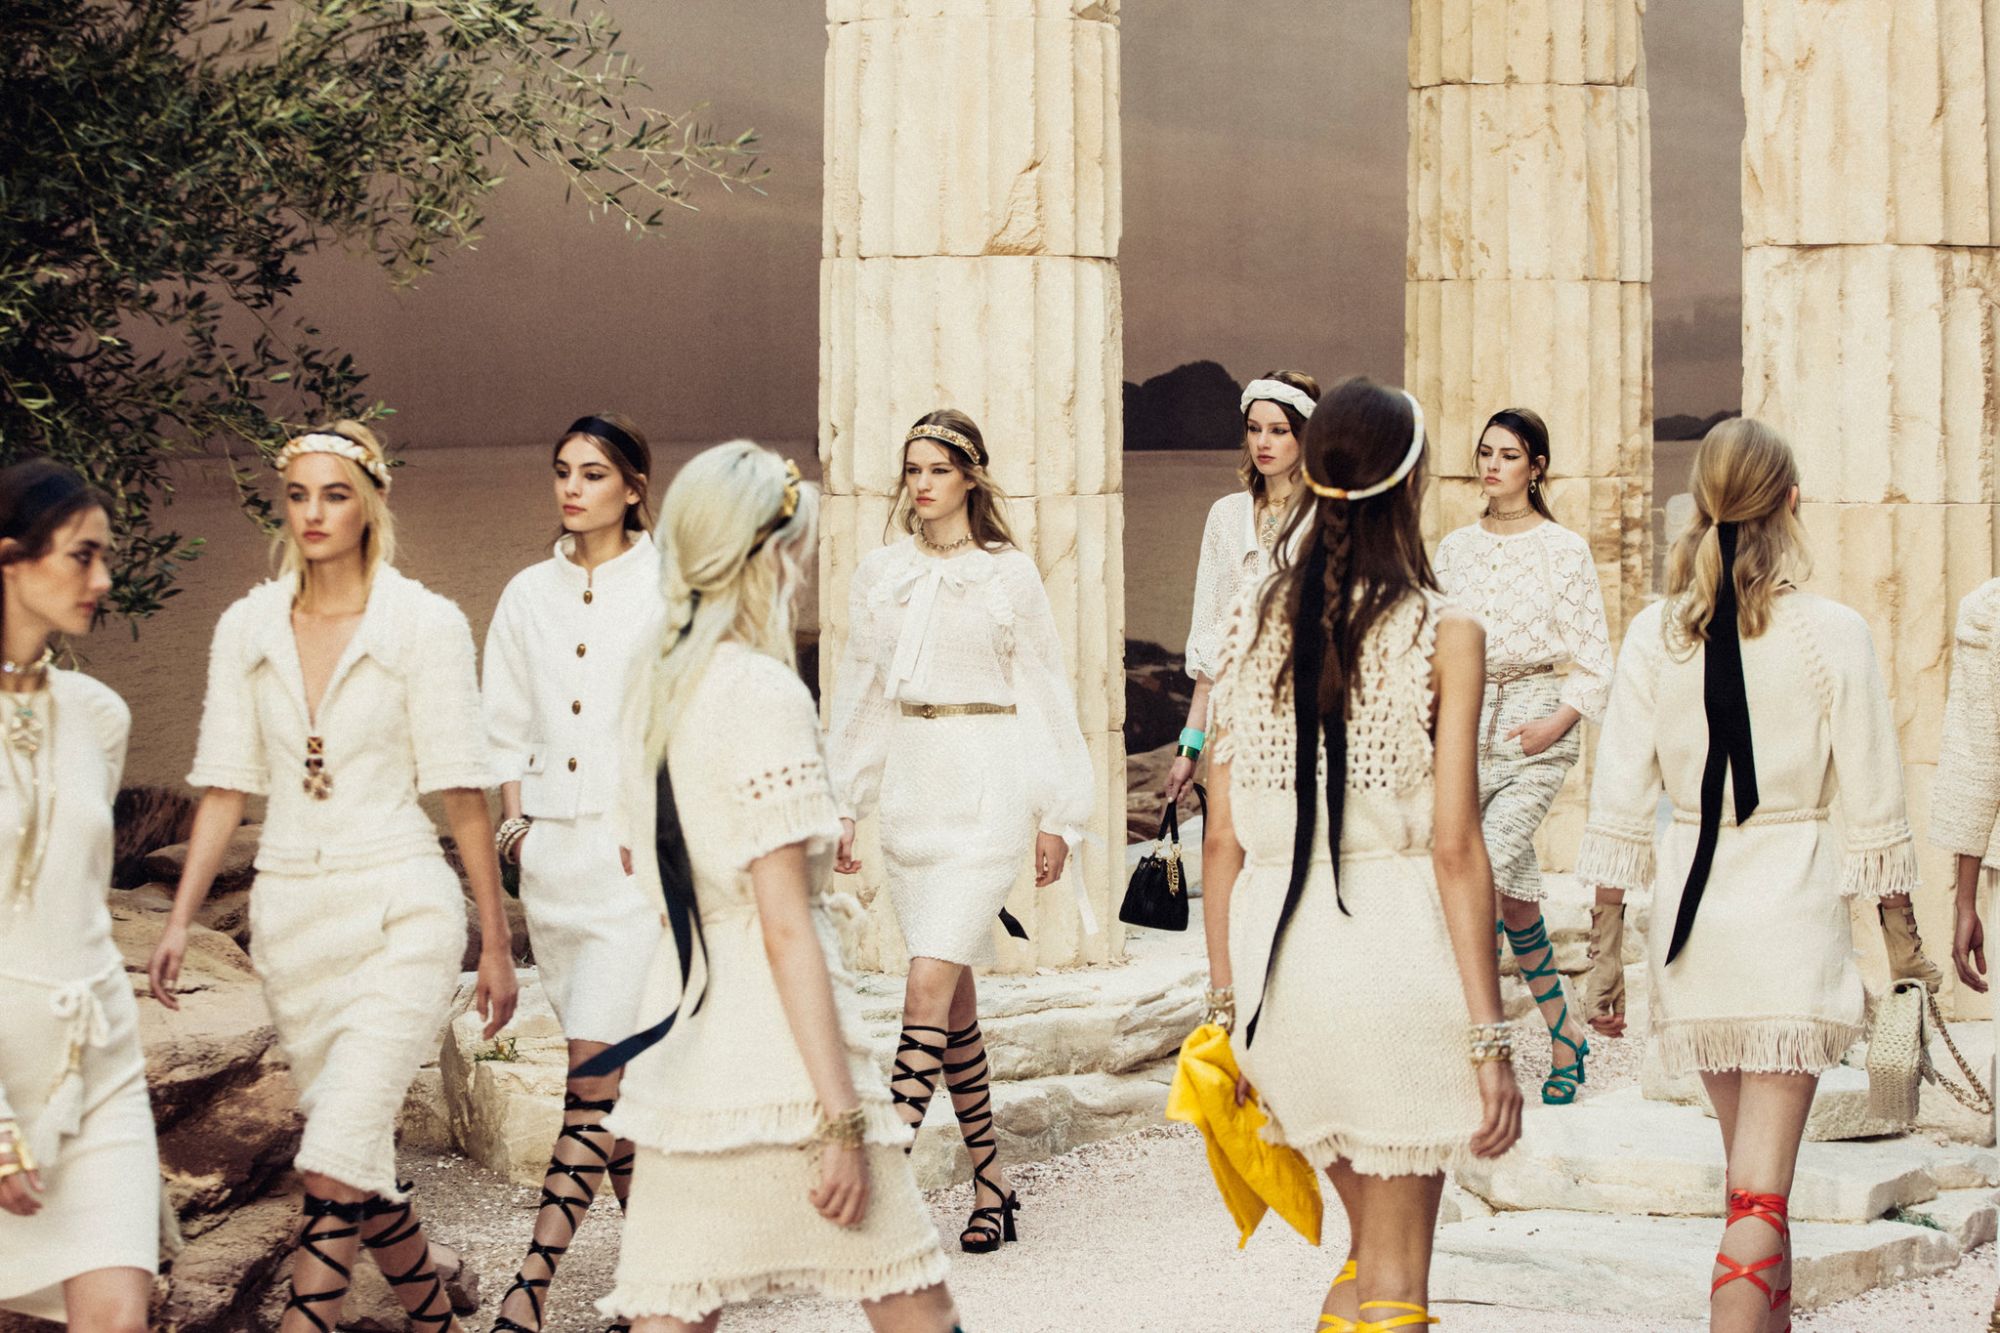 The Chanel Cruise18 collection brings us to the Ancient Greece